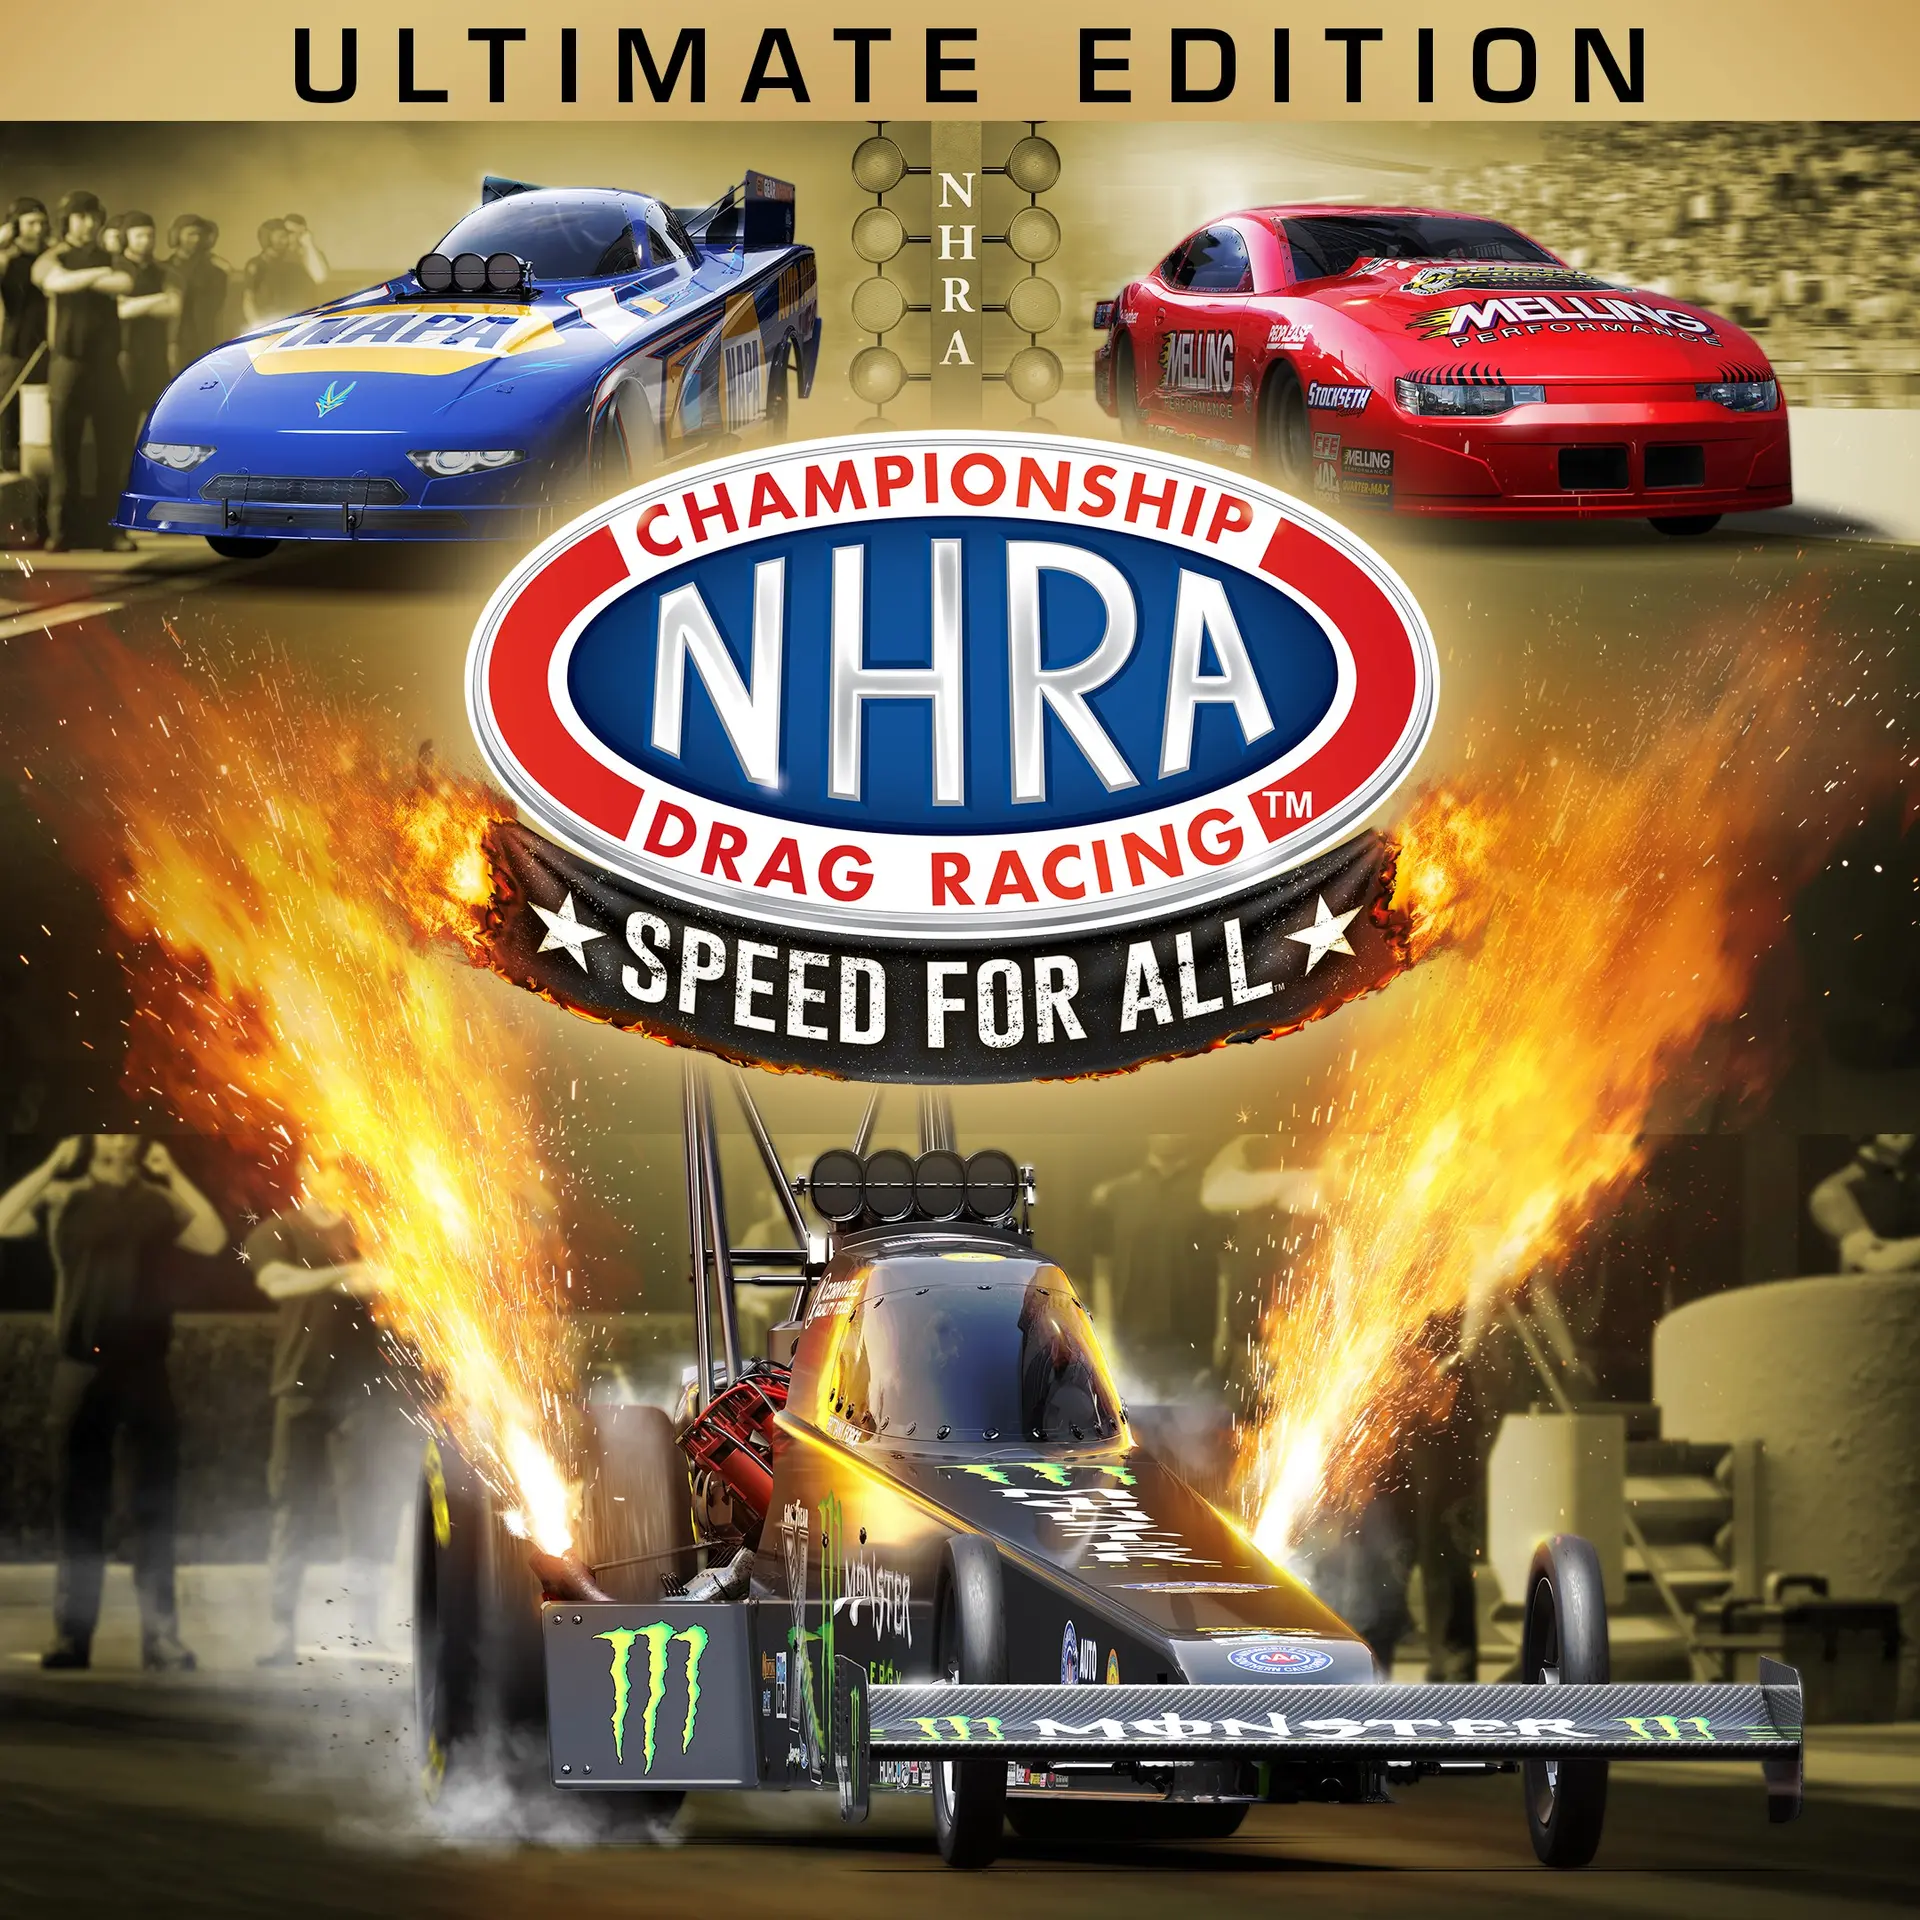 NHRA Championship Drag Racing: Speed for All - Ultimate Edition (XBOX One - Cheapest Store)